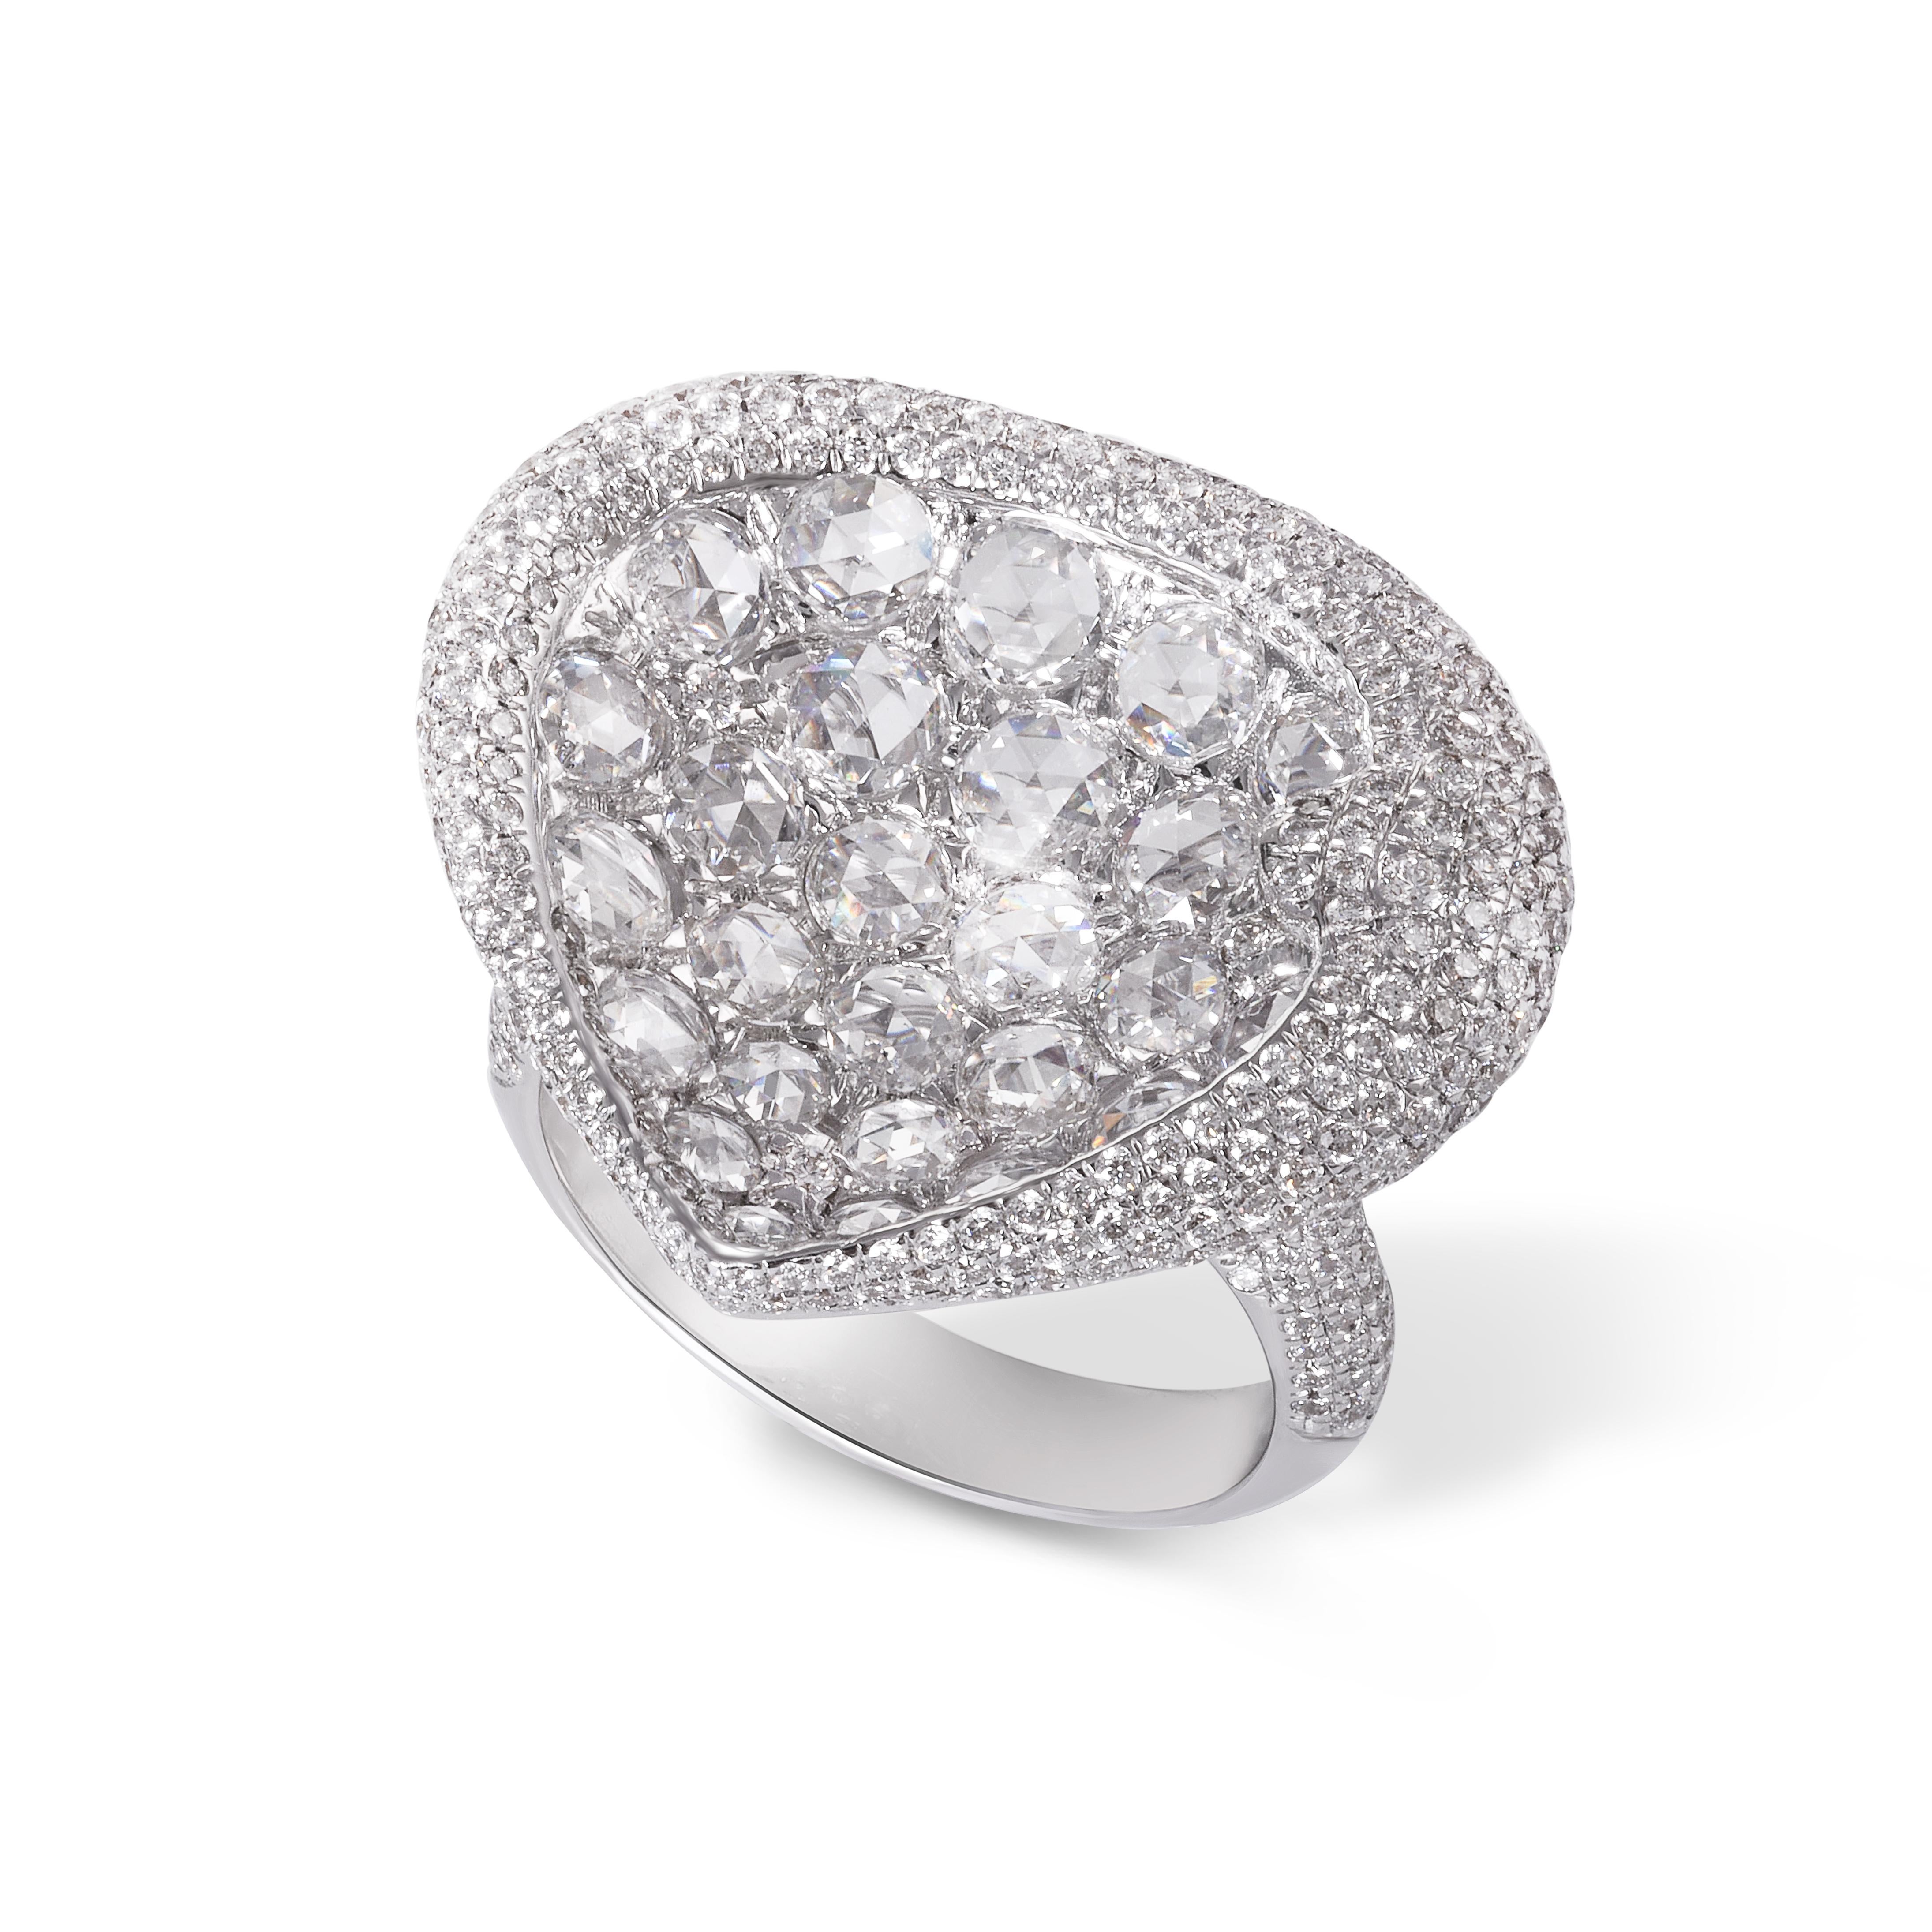 This striking one of a kind diamond ring showcases Rarever's fine craftsmanship. 1.75cts of rose cut diamonds are arranged in a bowl-like formation and framed with 1.52cts of finely set round brilliant cut diamonds to further enhance the leaf-shaped